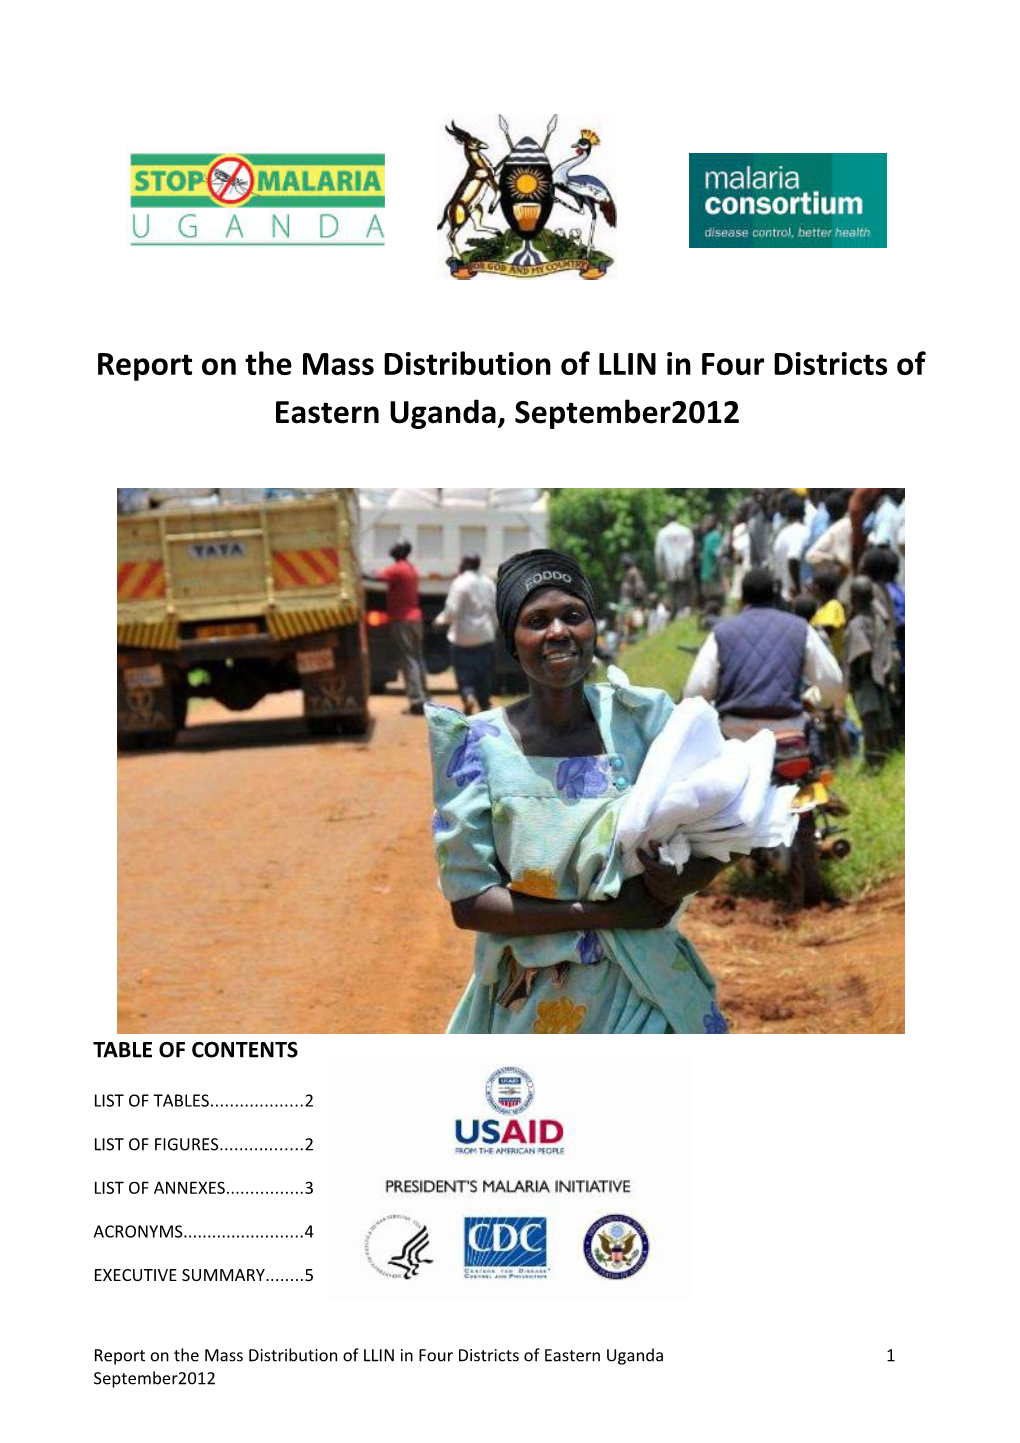 Report on the Mass Distribution of Llinin Four Districts of Eastern Uganda, September2012